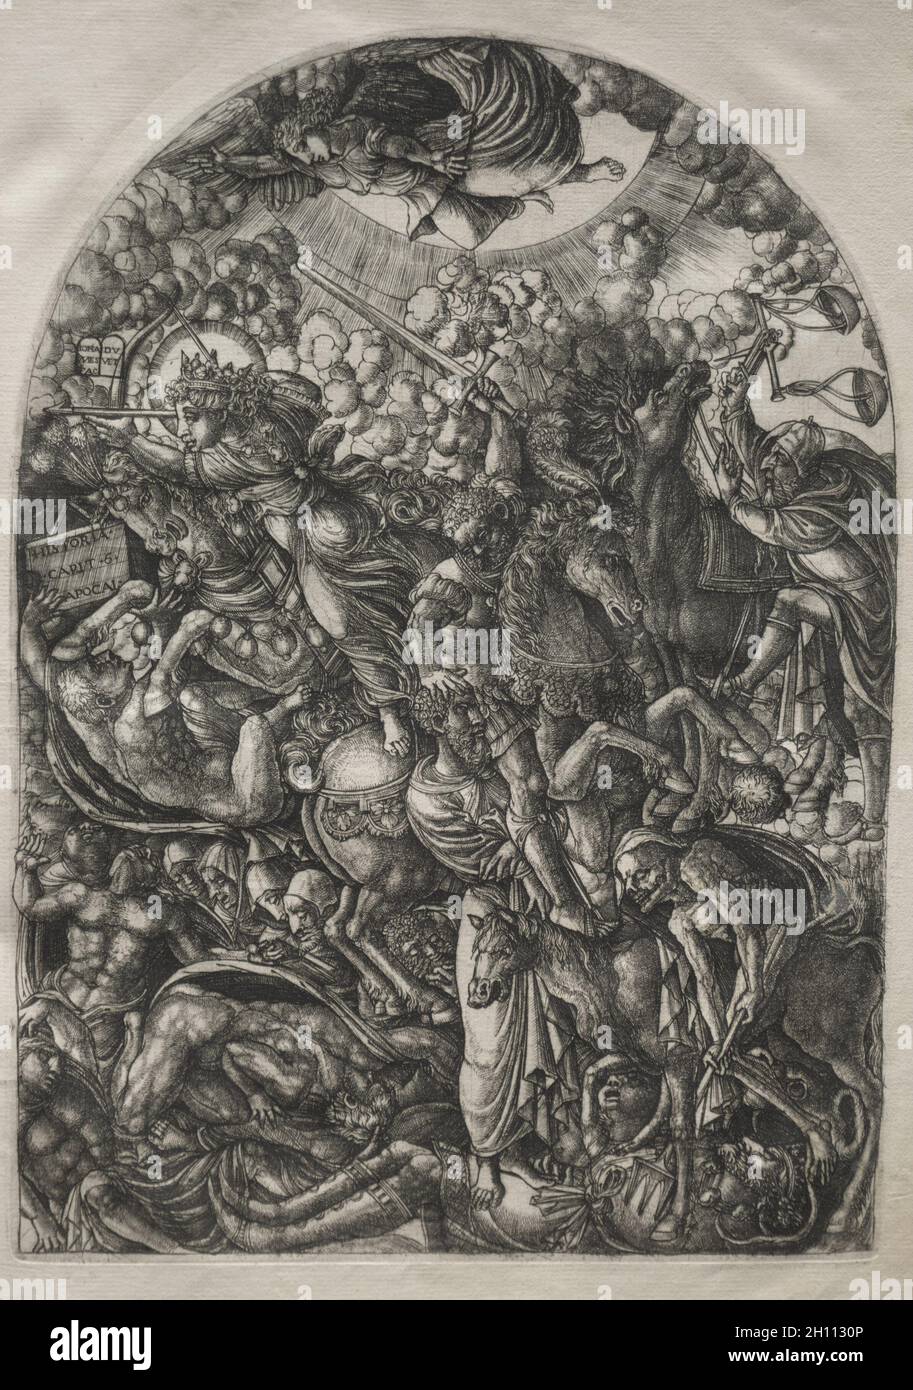 The Apocalypse: St. John Sees the Four Riders, 1546-1556. Jean Duvet (French, 1485-1561). Engraving; Stock Photo